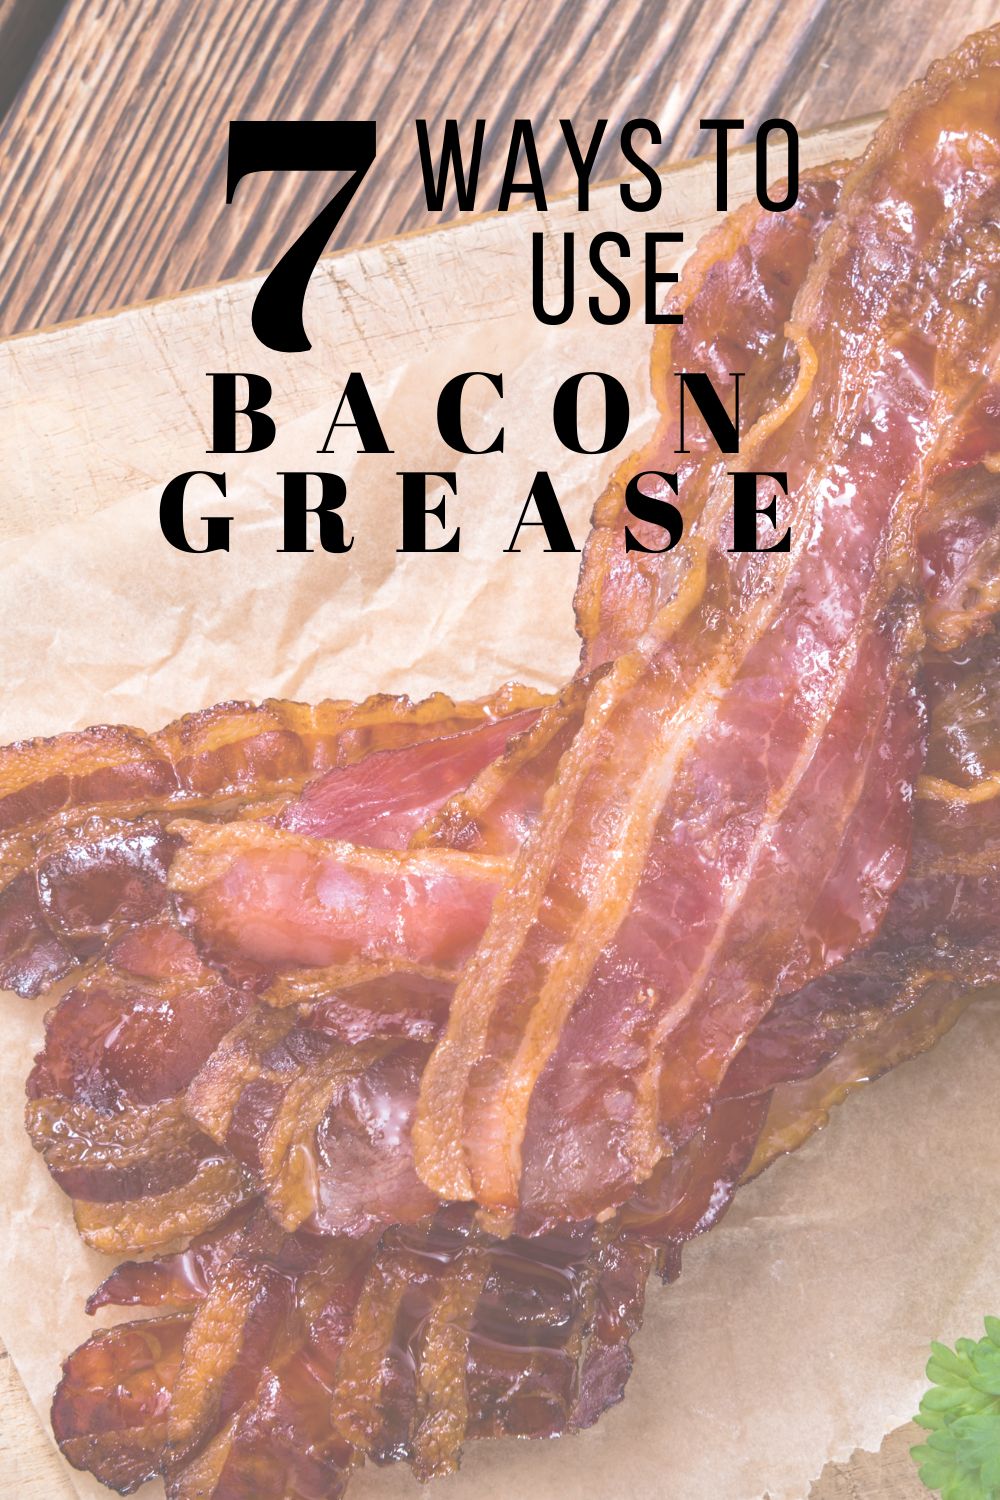 https://www.momsconfession.com/wp-content/uploads/2022/10/Top-7-Ways-to-Use-Bacon-Grease.jpg